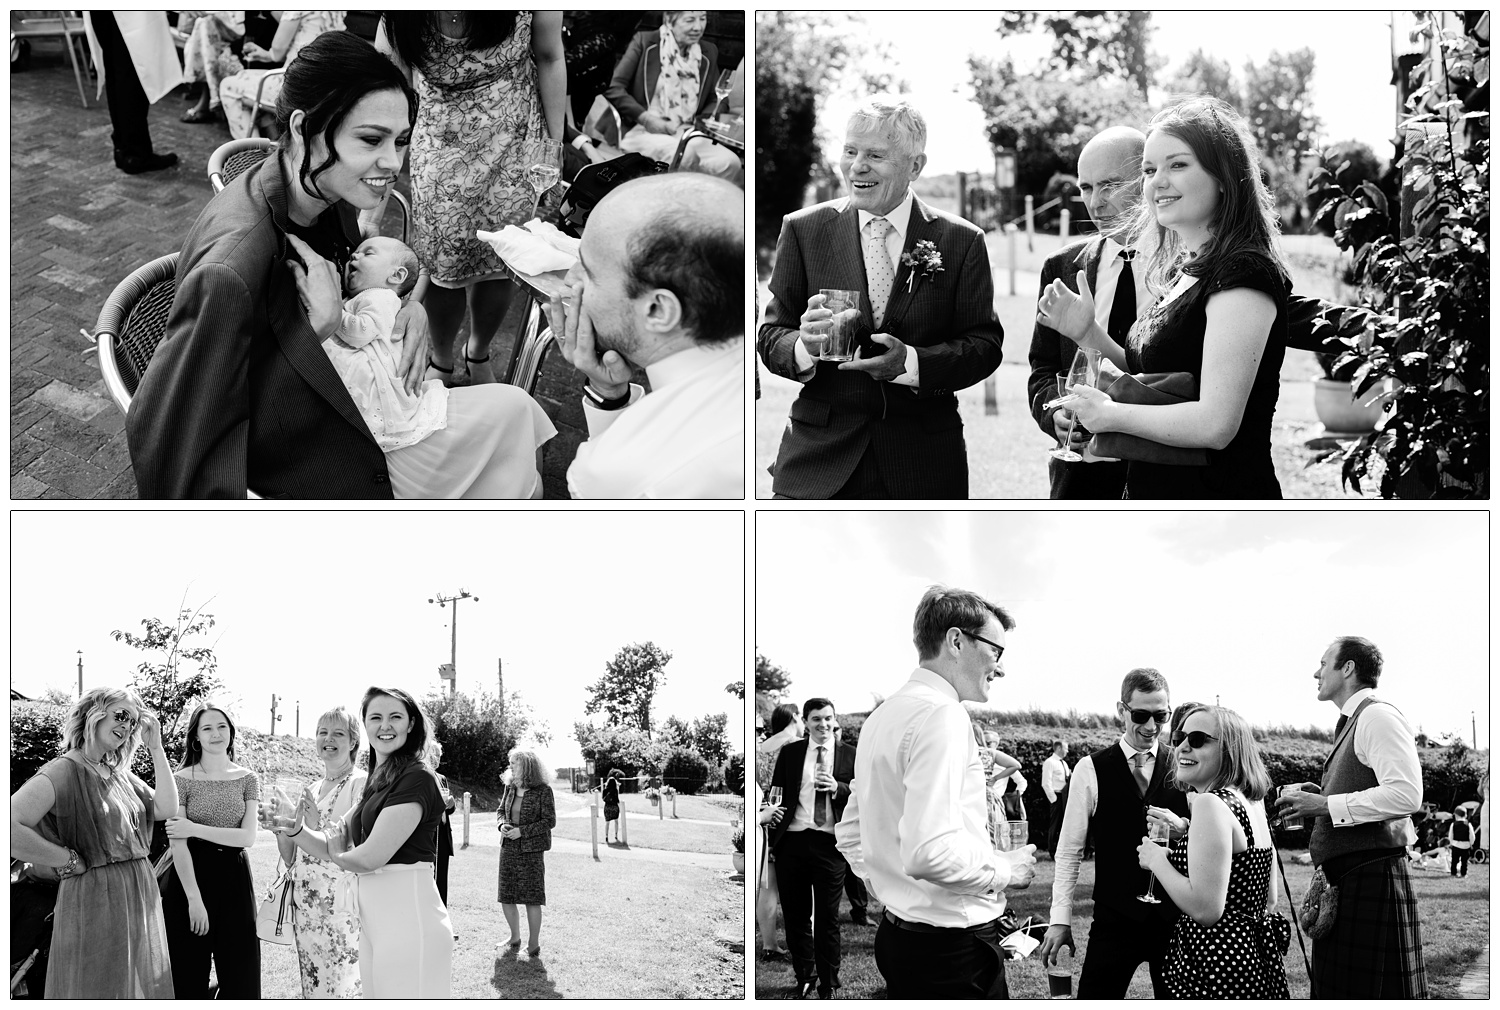 candid photographs of guests enjoying drinks in the wedding garden after the ceremony.